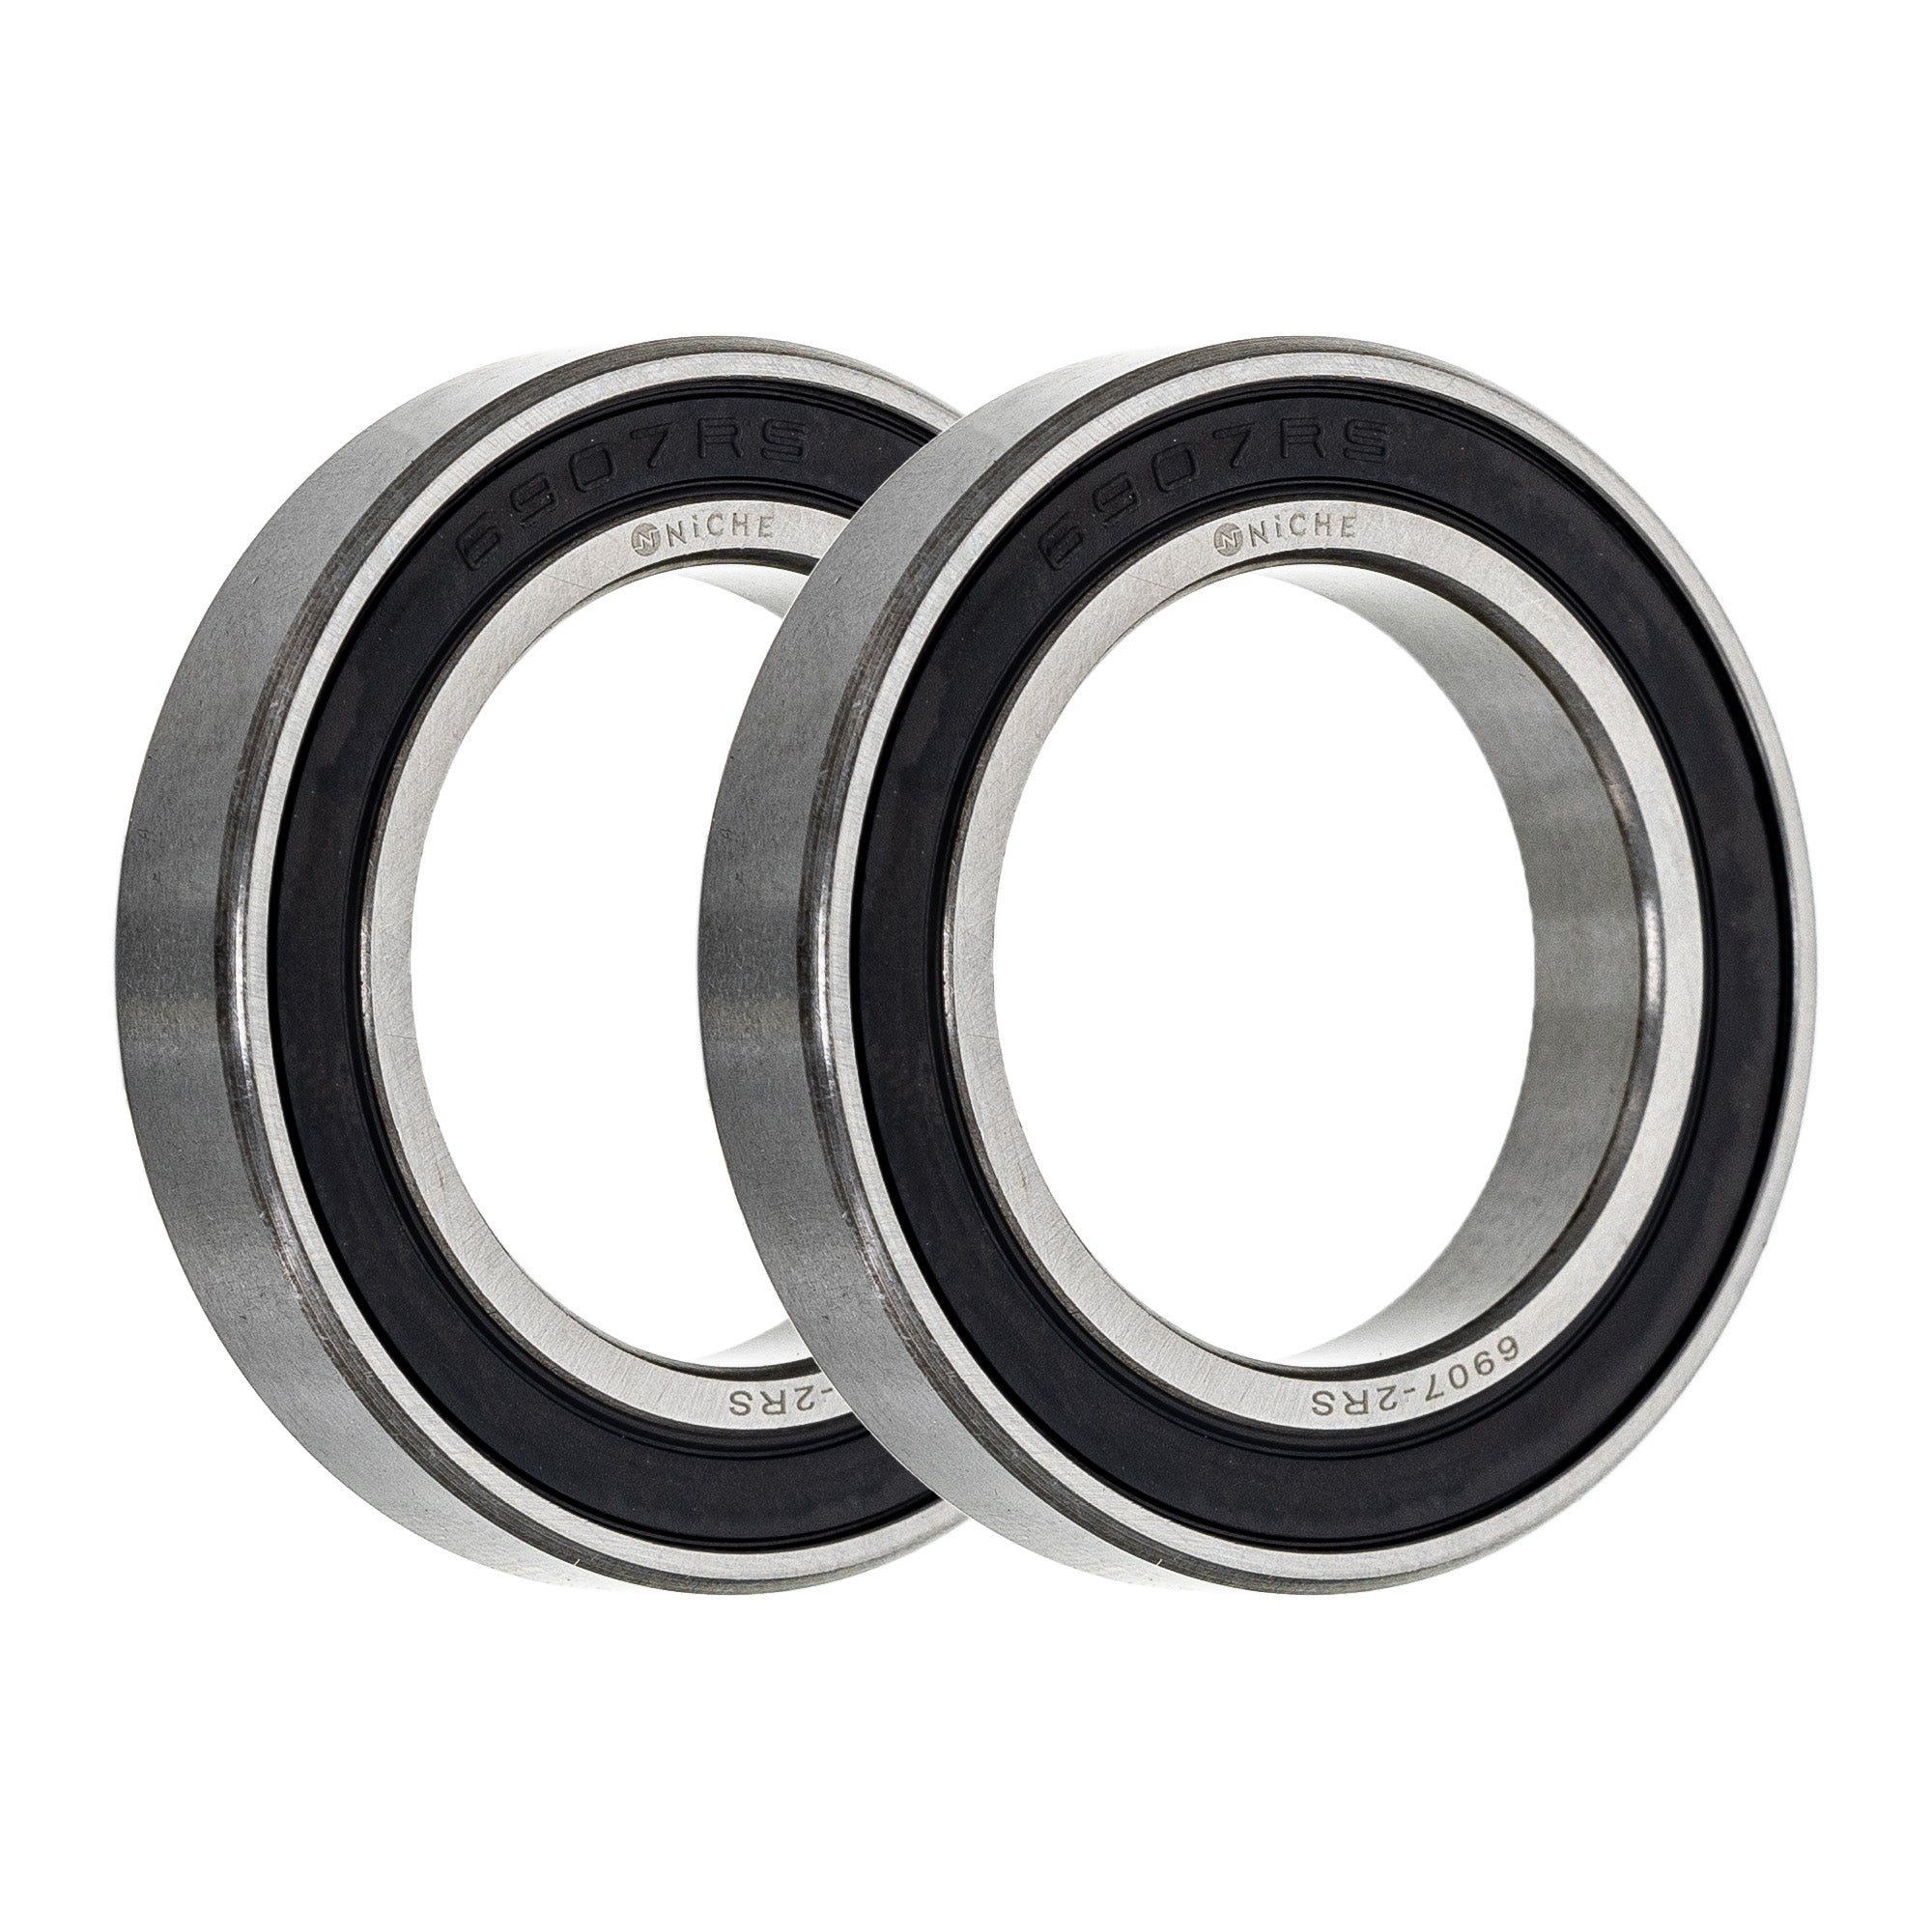 Single Row, Deep Groove, Ball Bearing Pack of 2 2-Pack for zOTHER MXU MXer Cat NICHE 519-CBB2288R